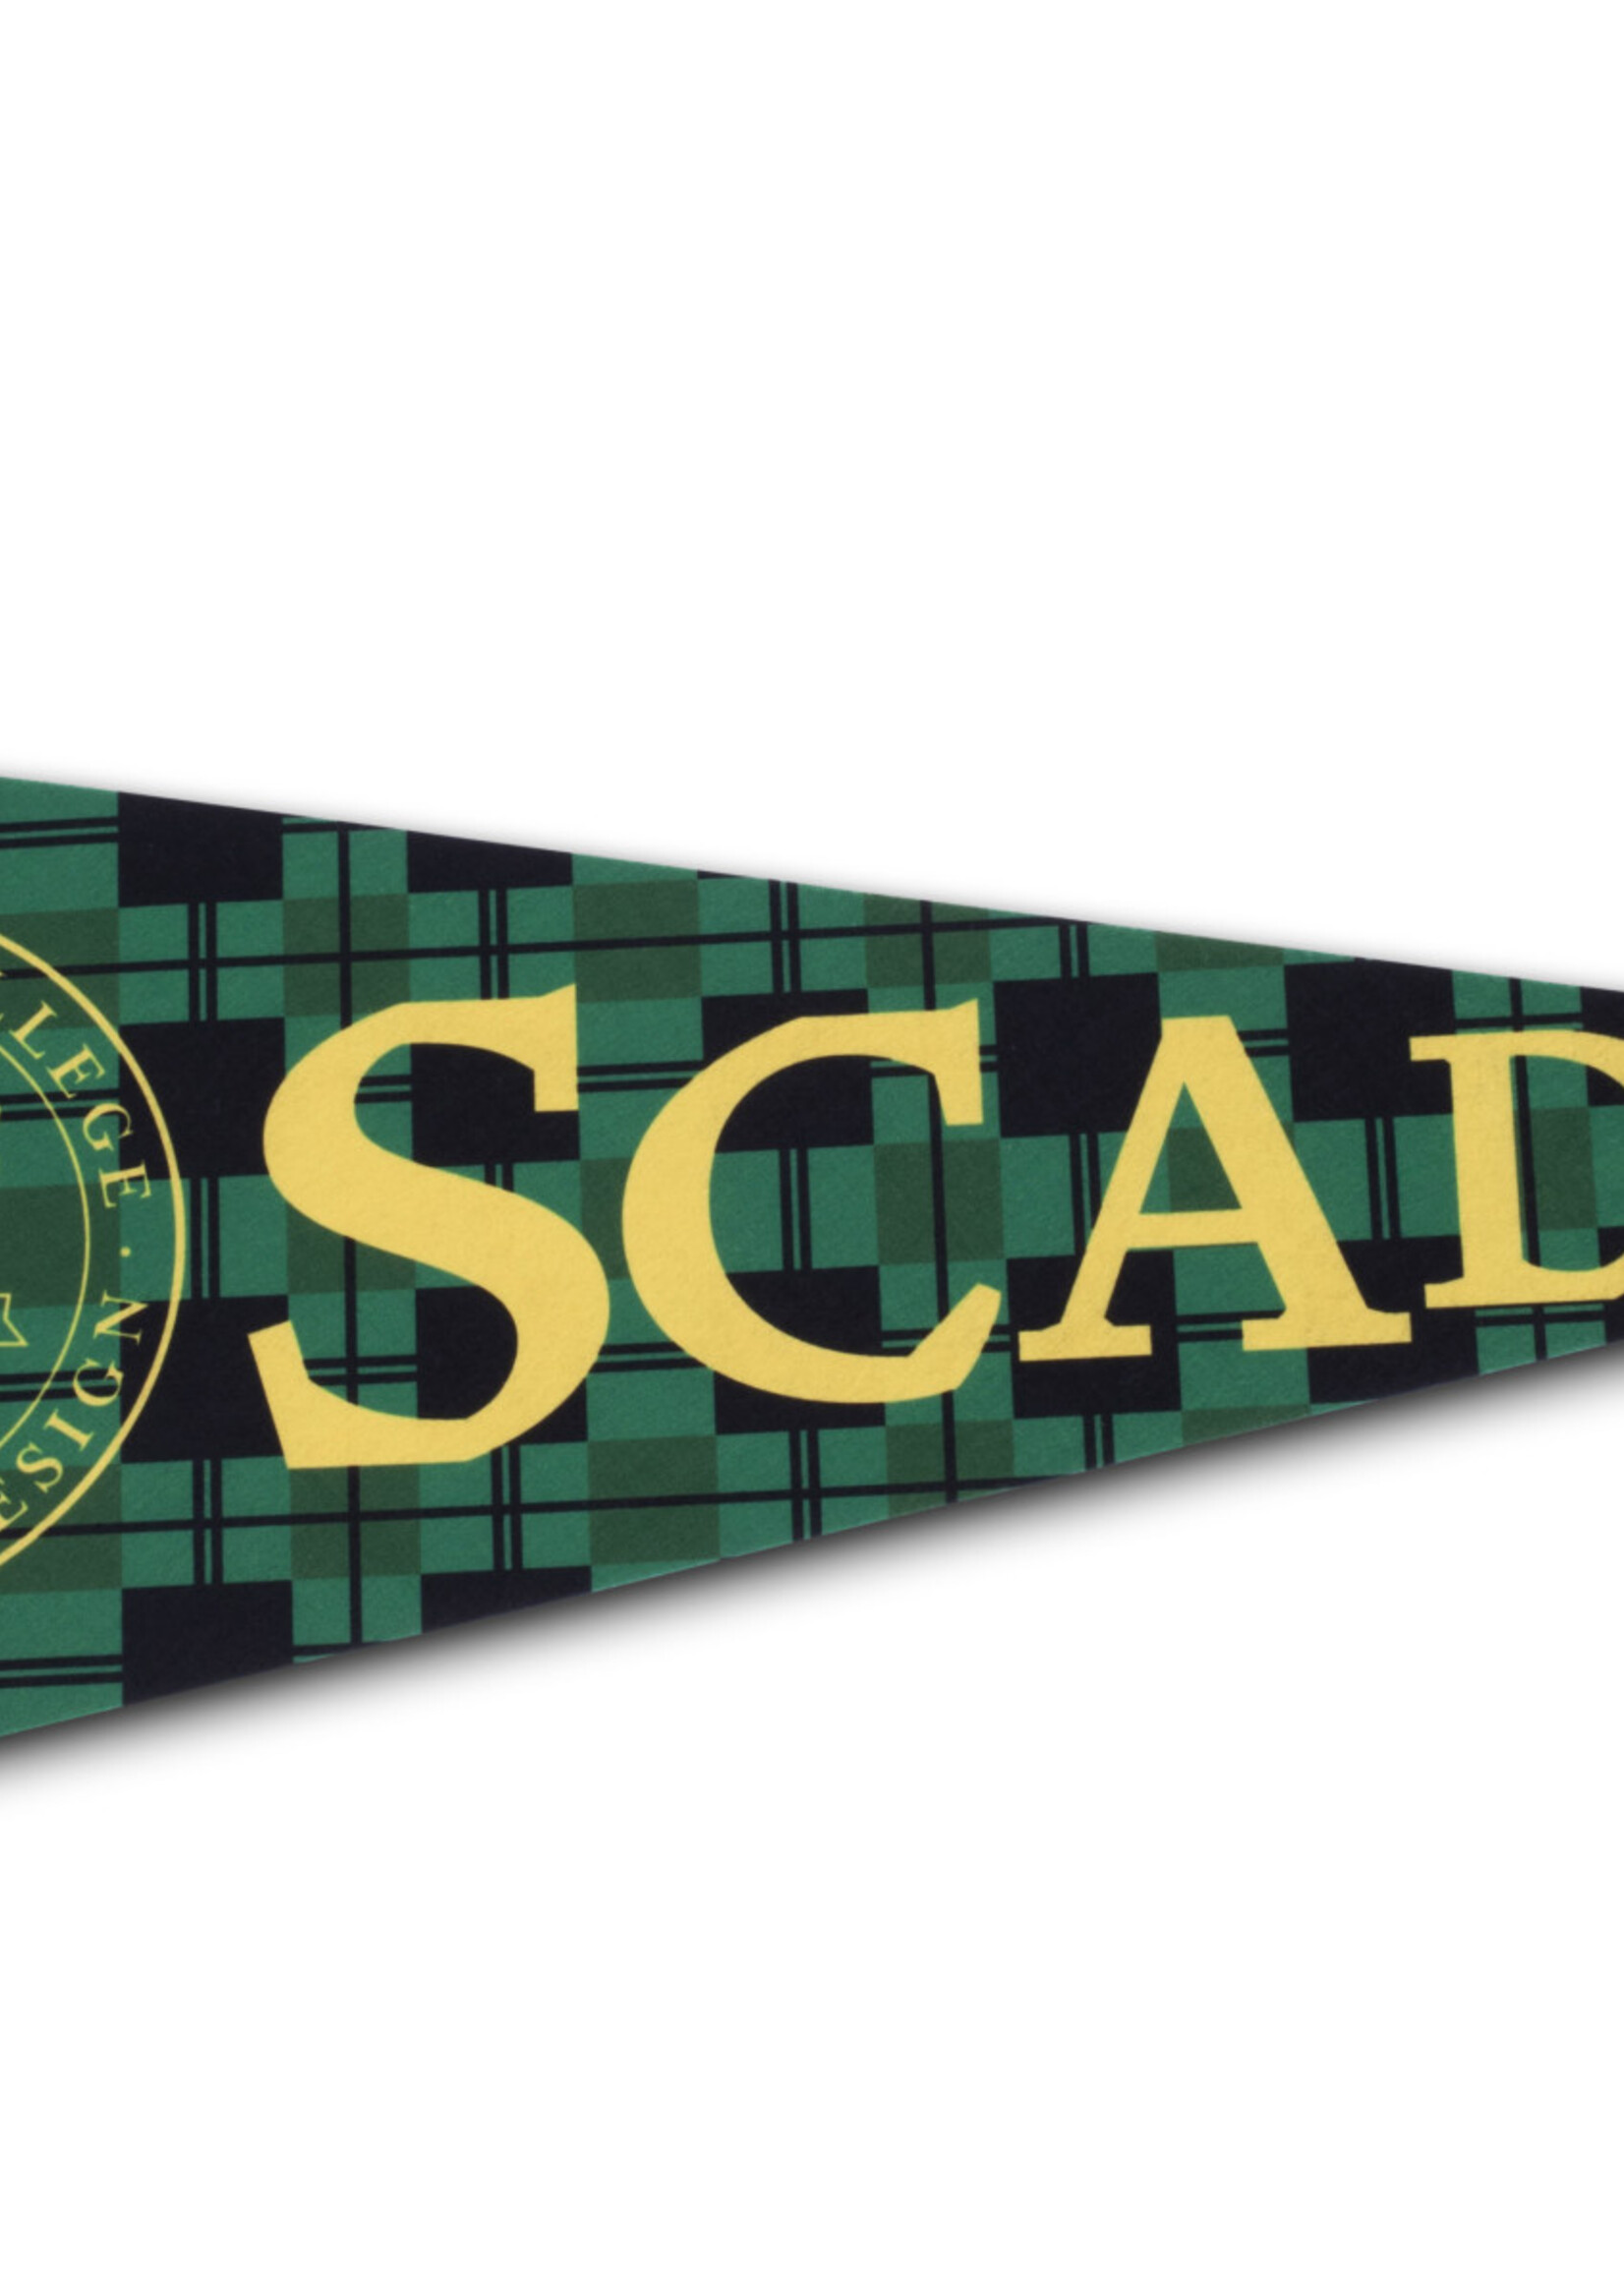 SCAD SCAD Large Pennant